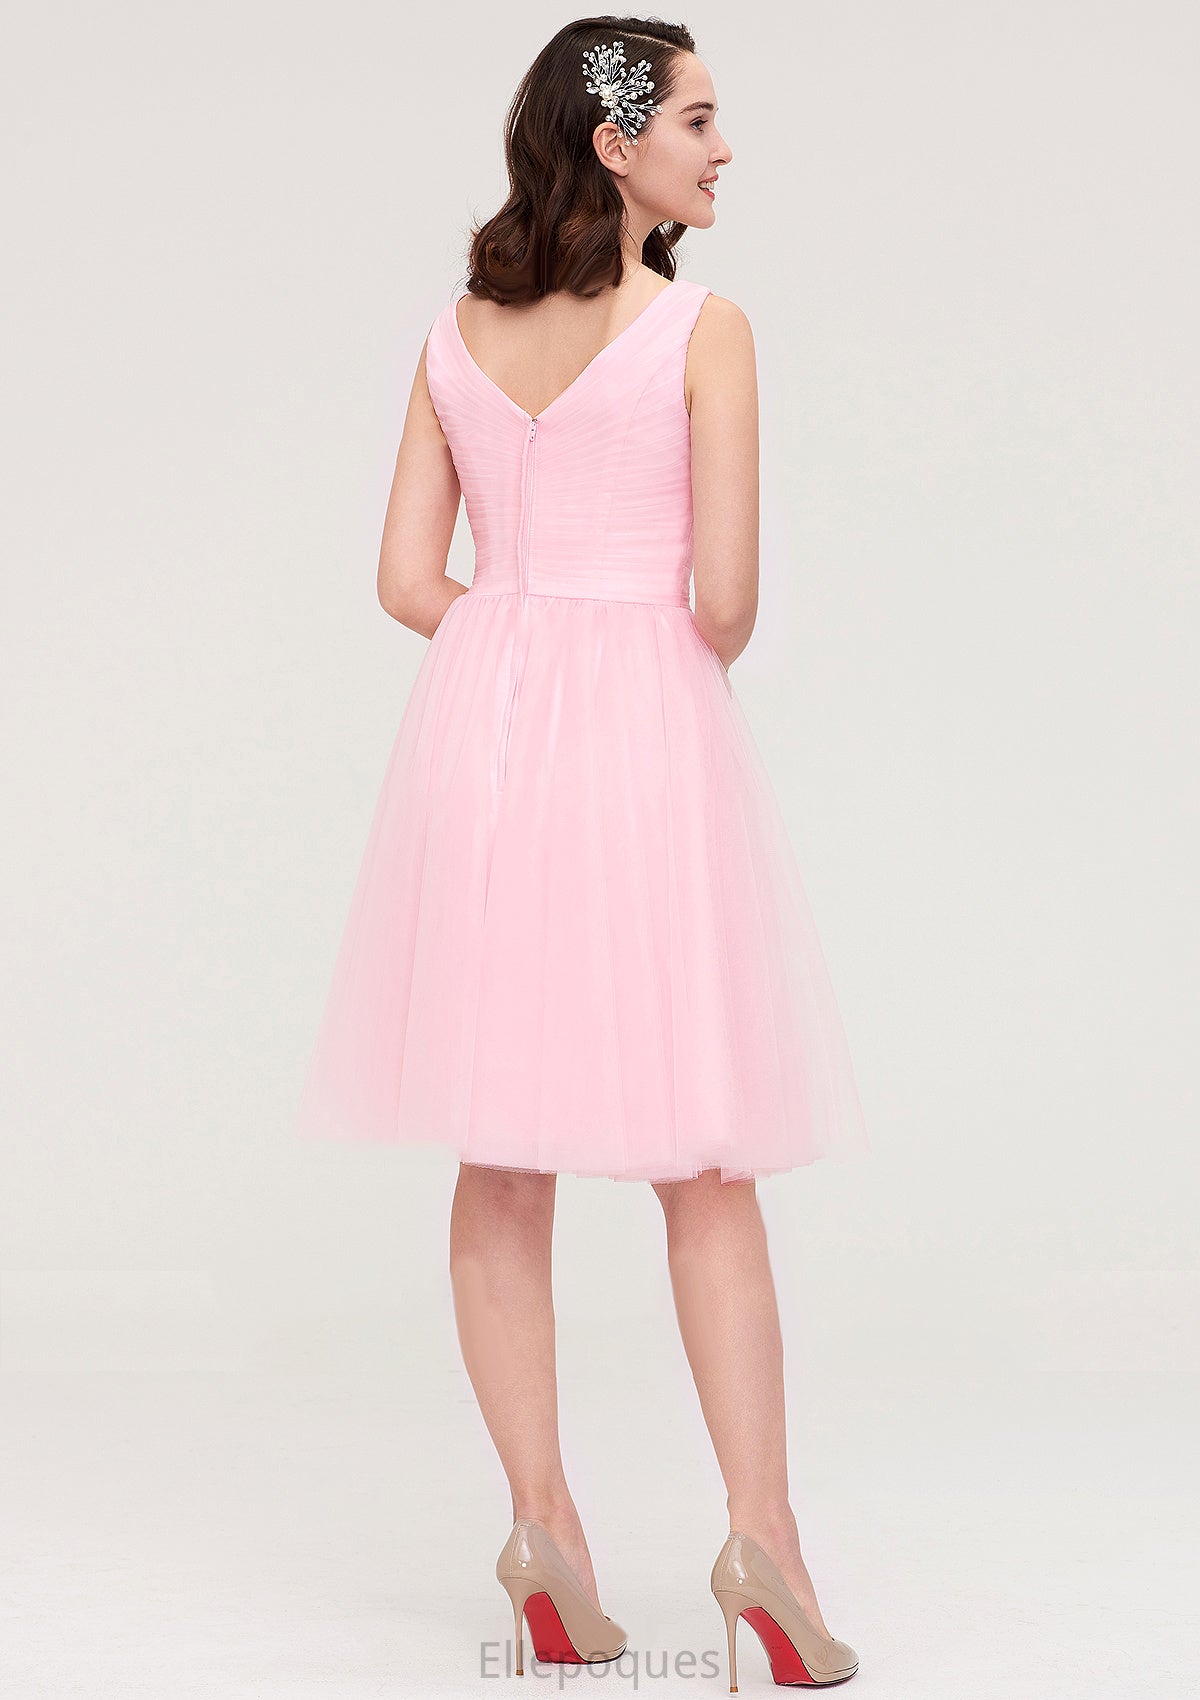 Sleeveless V Neck Knee-Length Tulle A-line/Princess Bridesmaid Dresses With Pleated Carlee HOP0025426